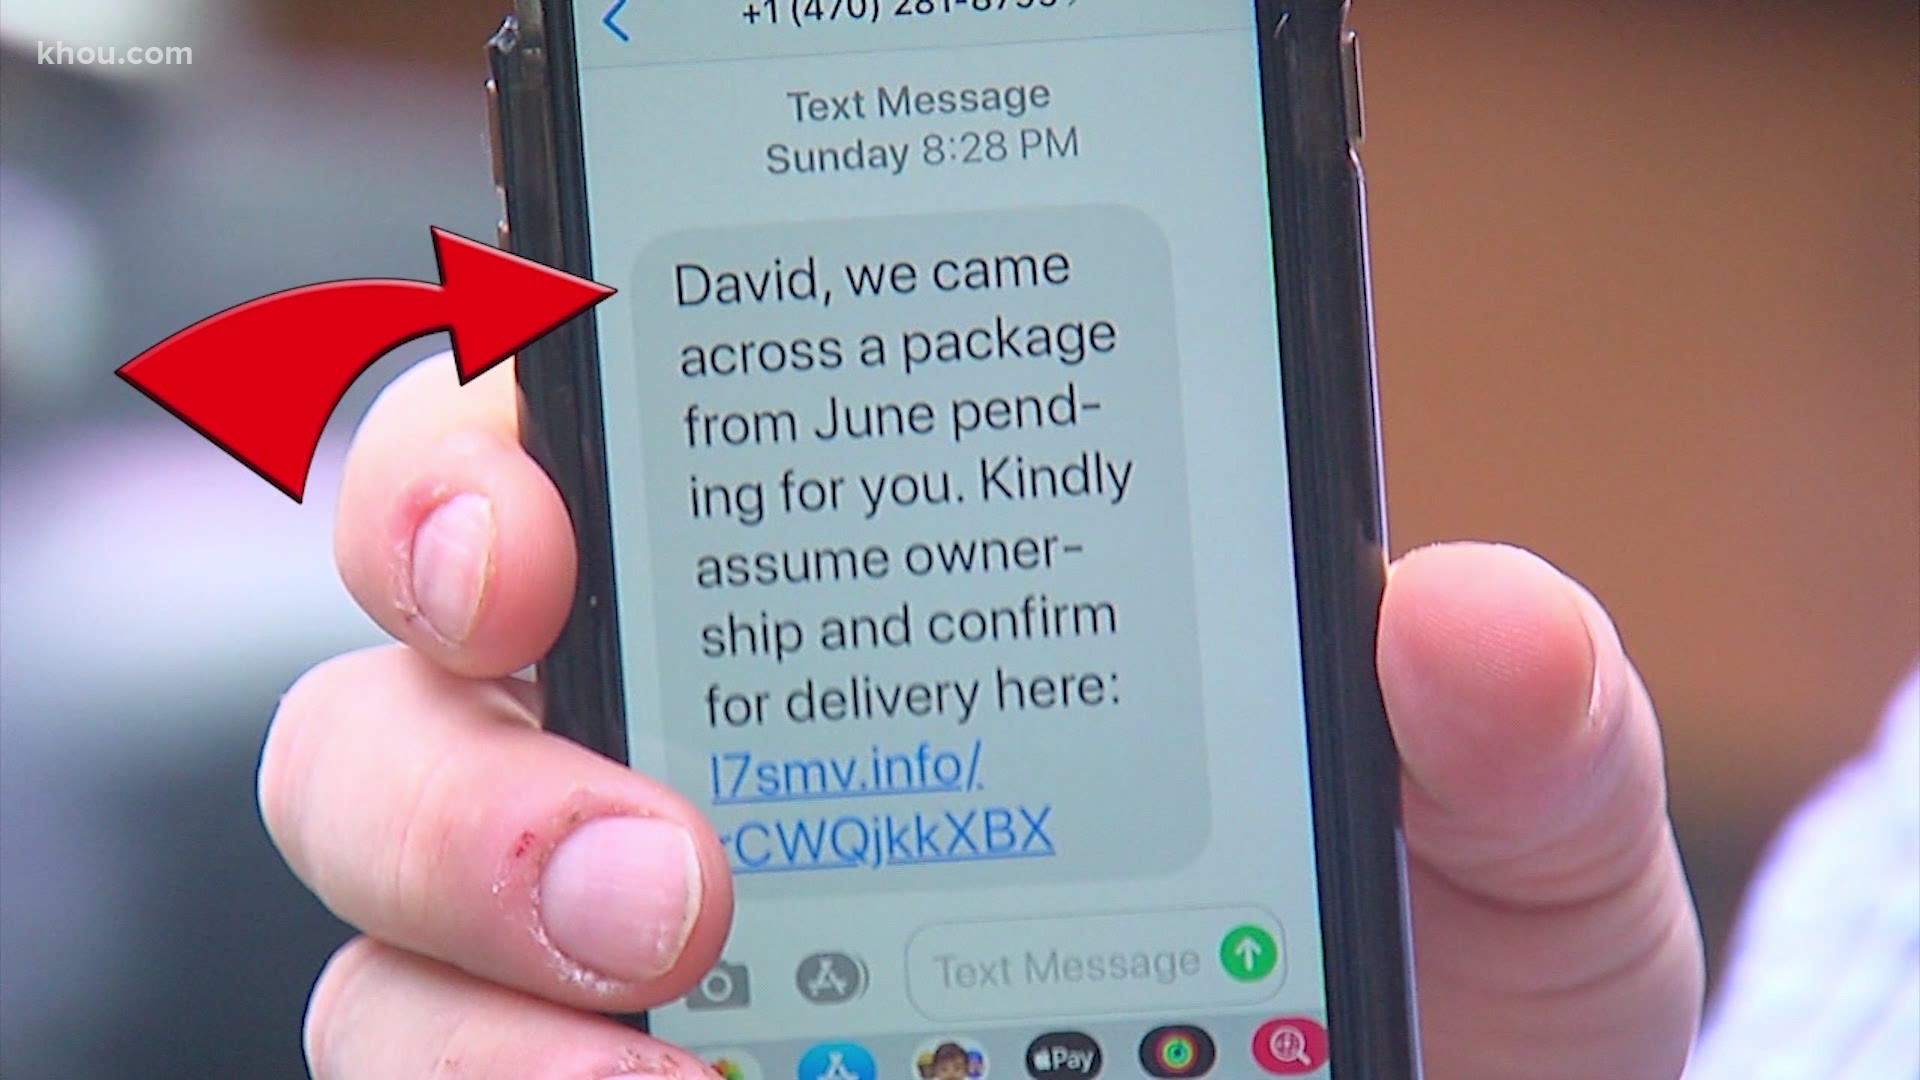 People across the country are receiving a strange text message this month. It claims a package is waiting for you to pick up.